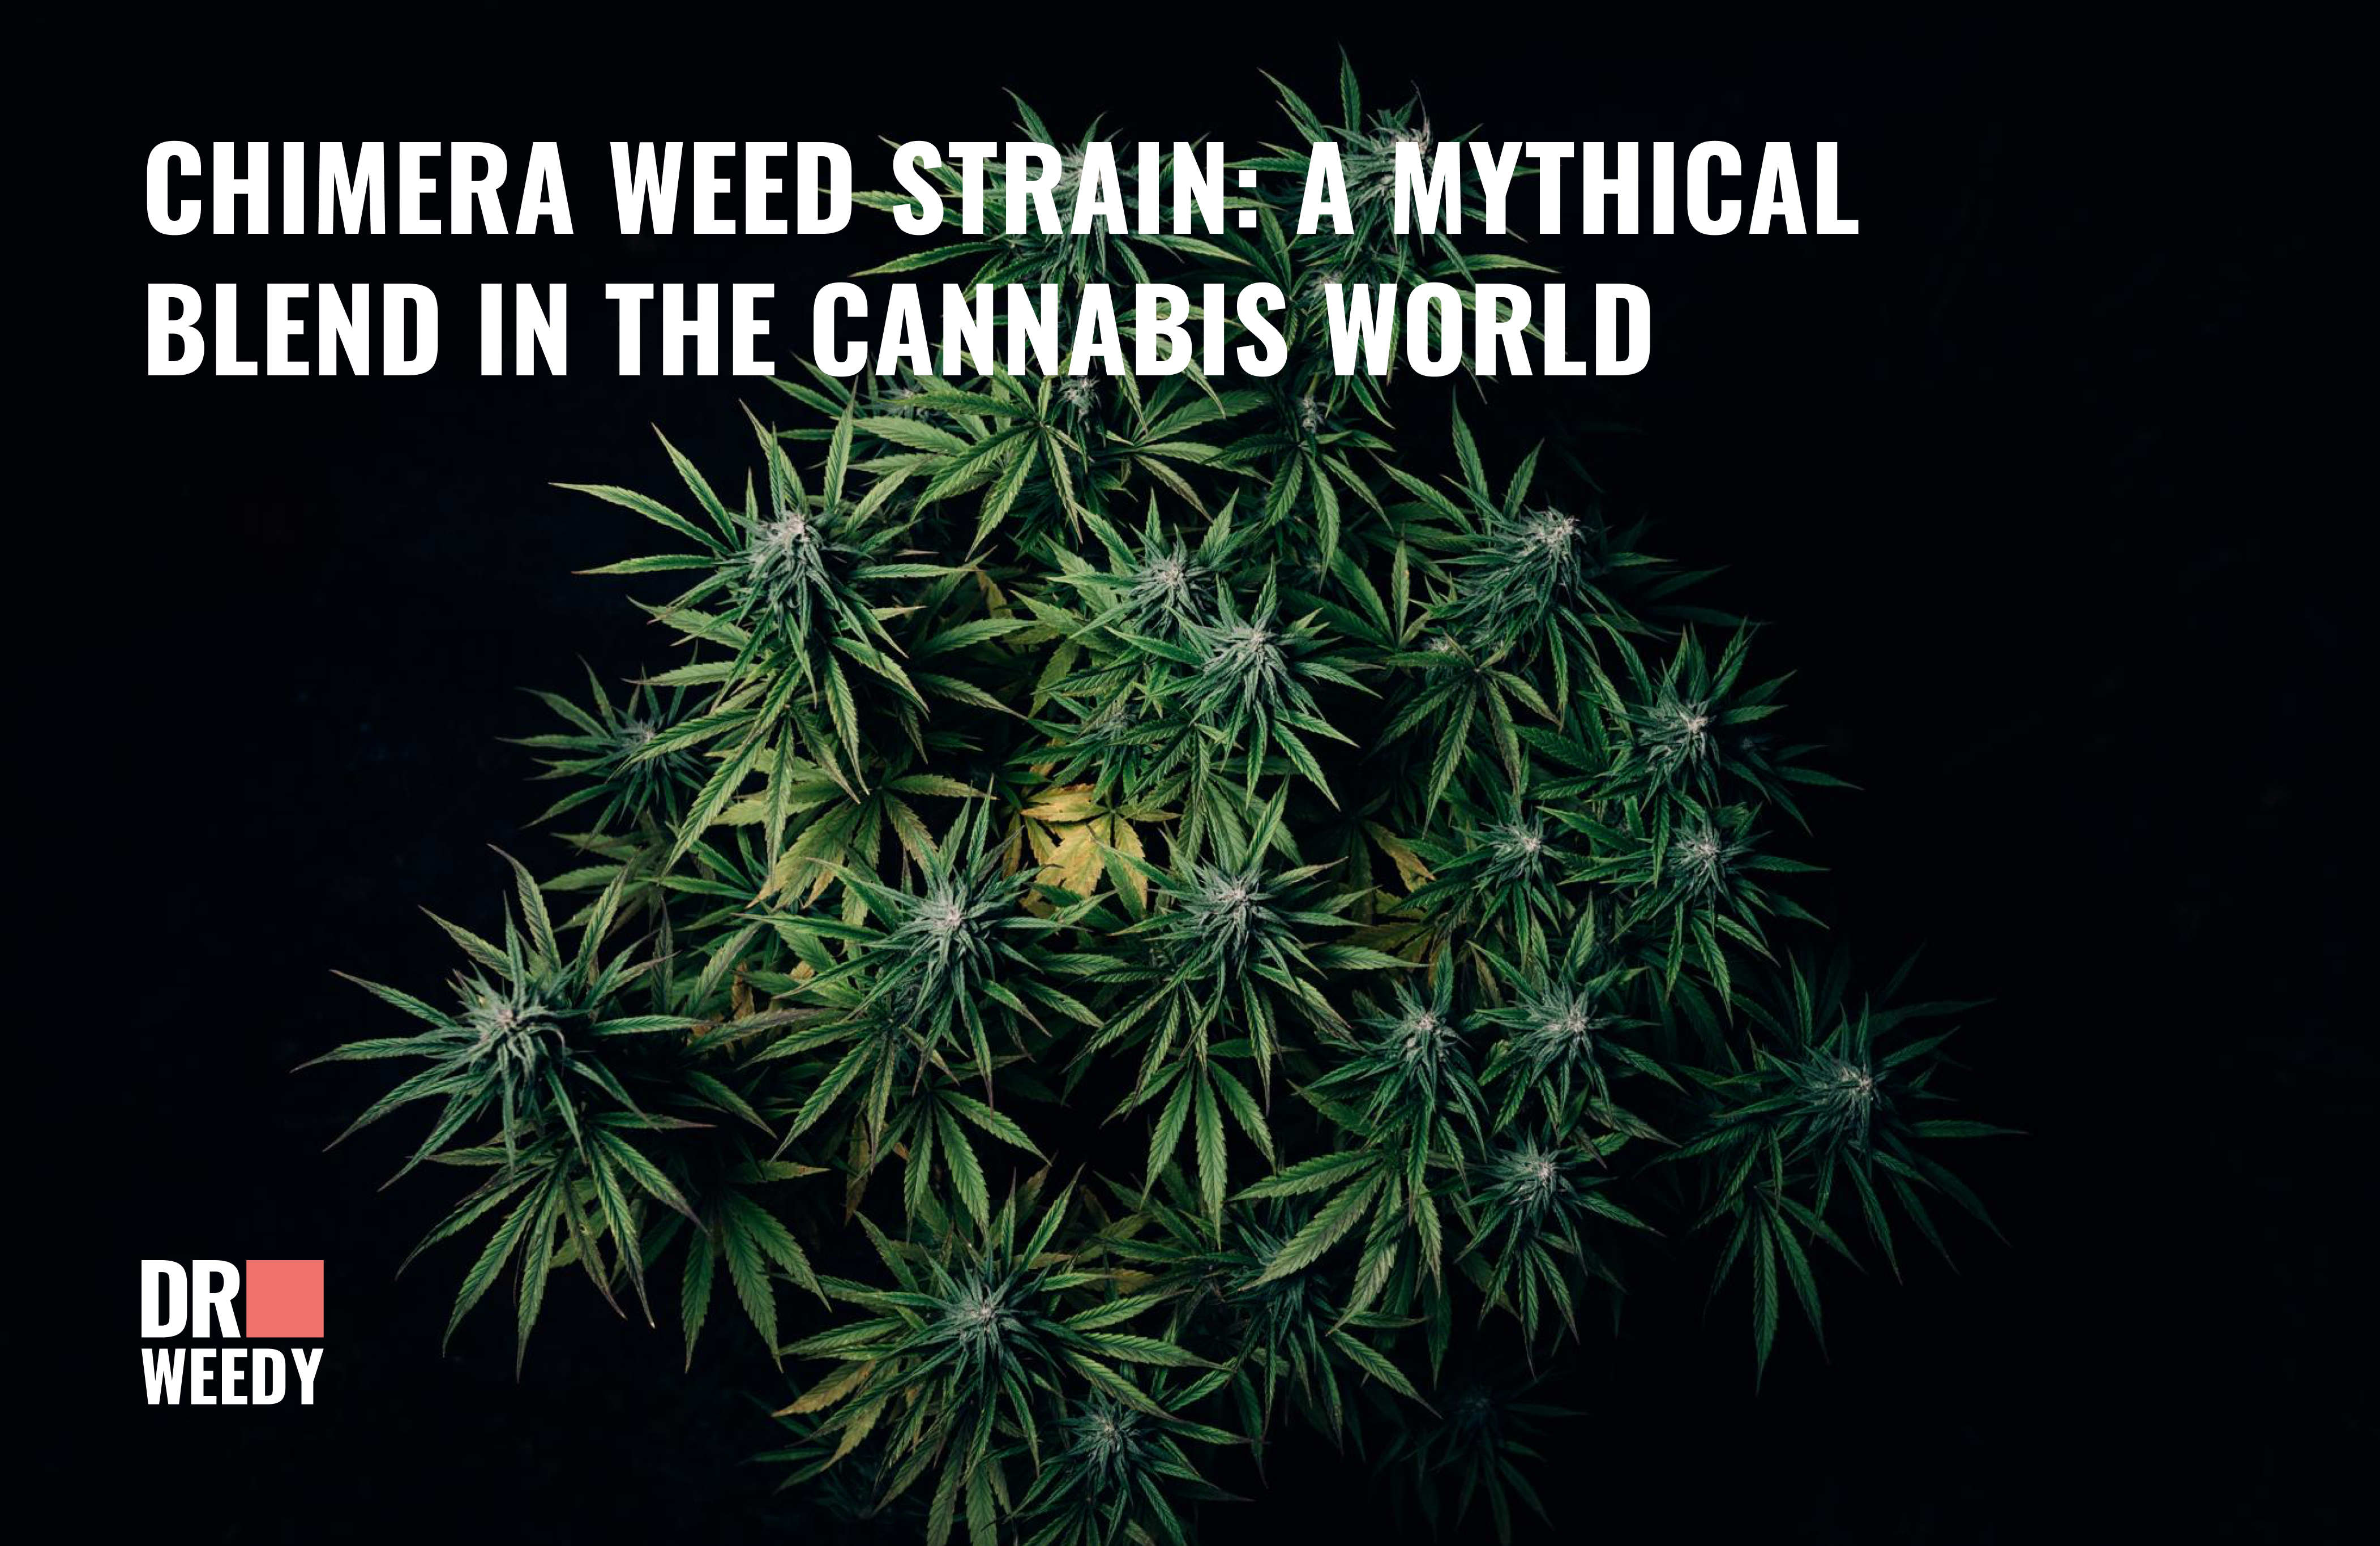 Chimera Weed Strain: A Mythical Blend in the Cannabis World